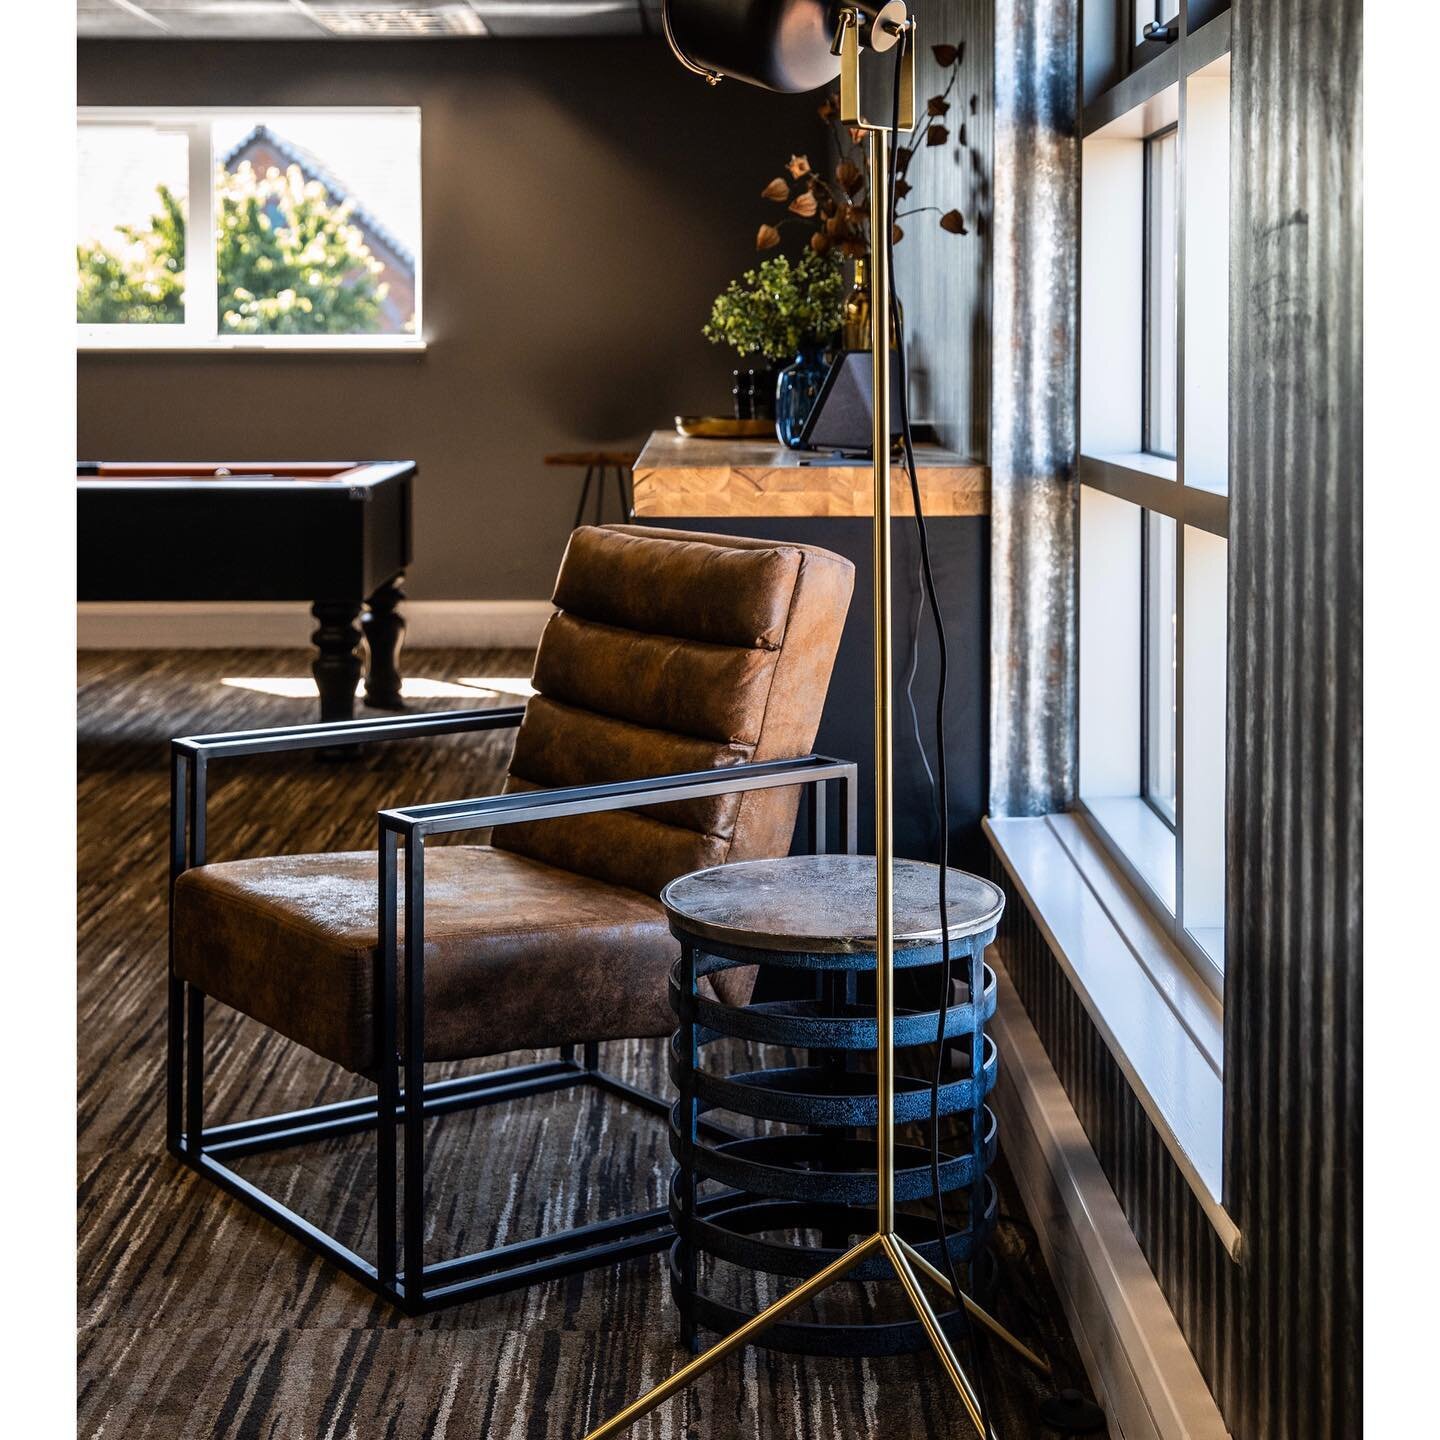 INDUSTRIAL DETAIL// The mixed metals, leather club chair and commercial style lighting, give this breakout space have a totally different look to the rest of the office 🤎